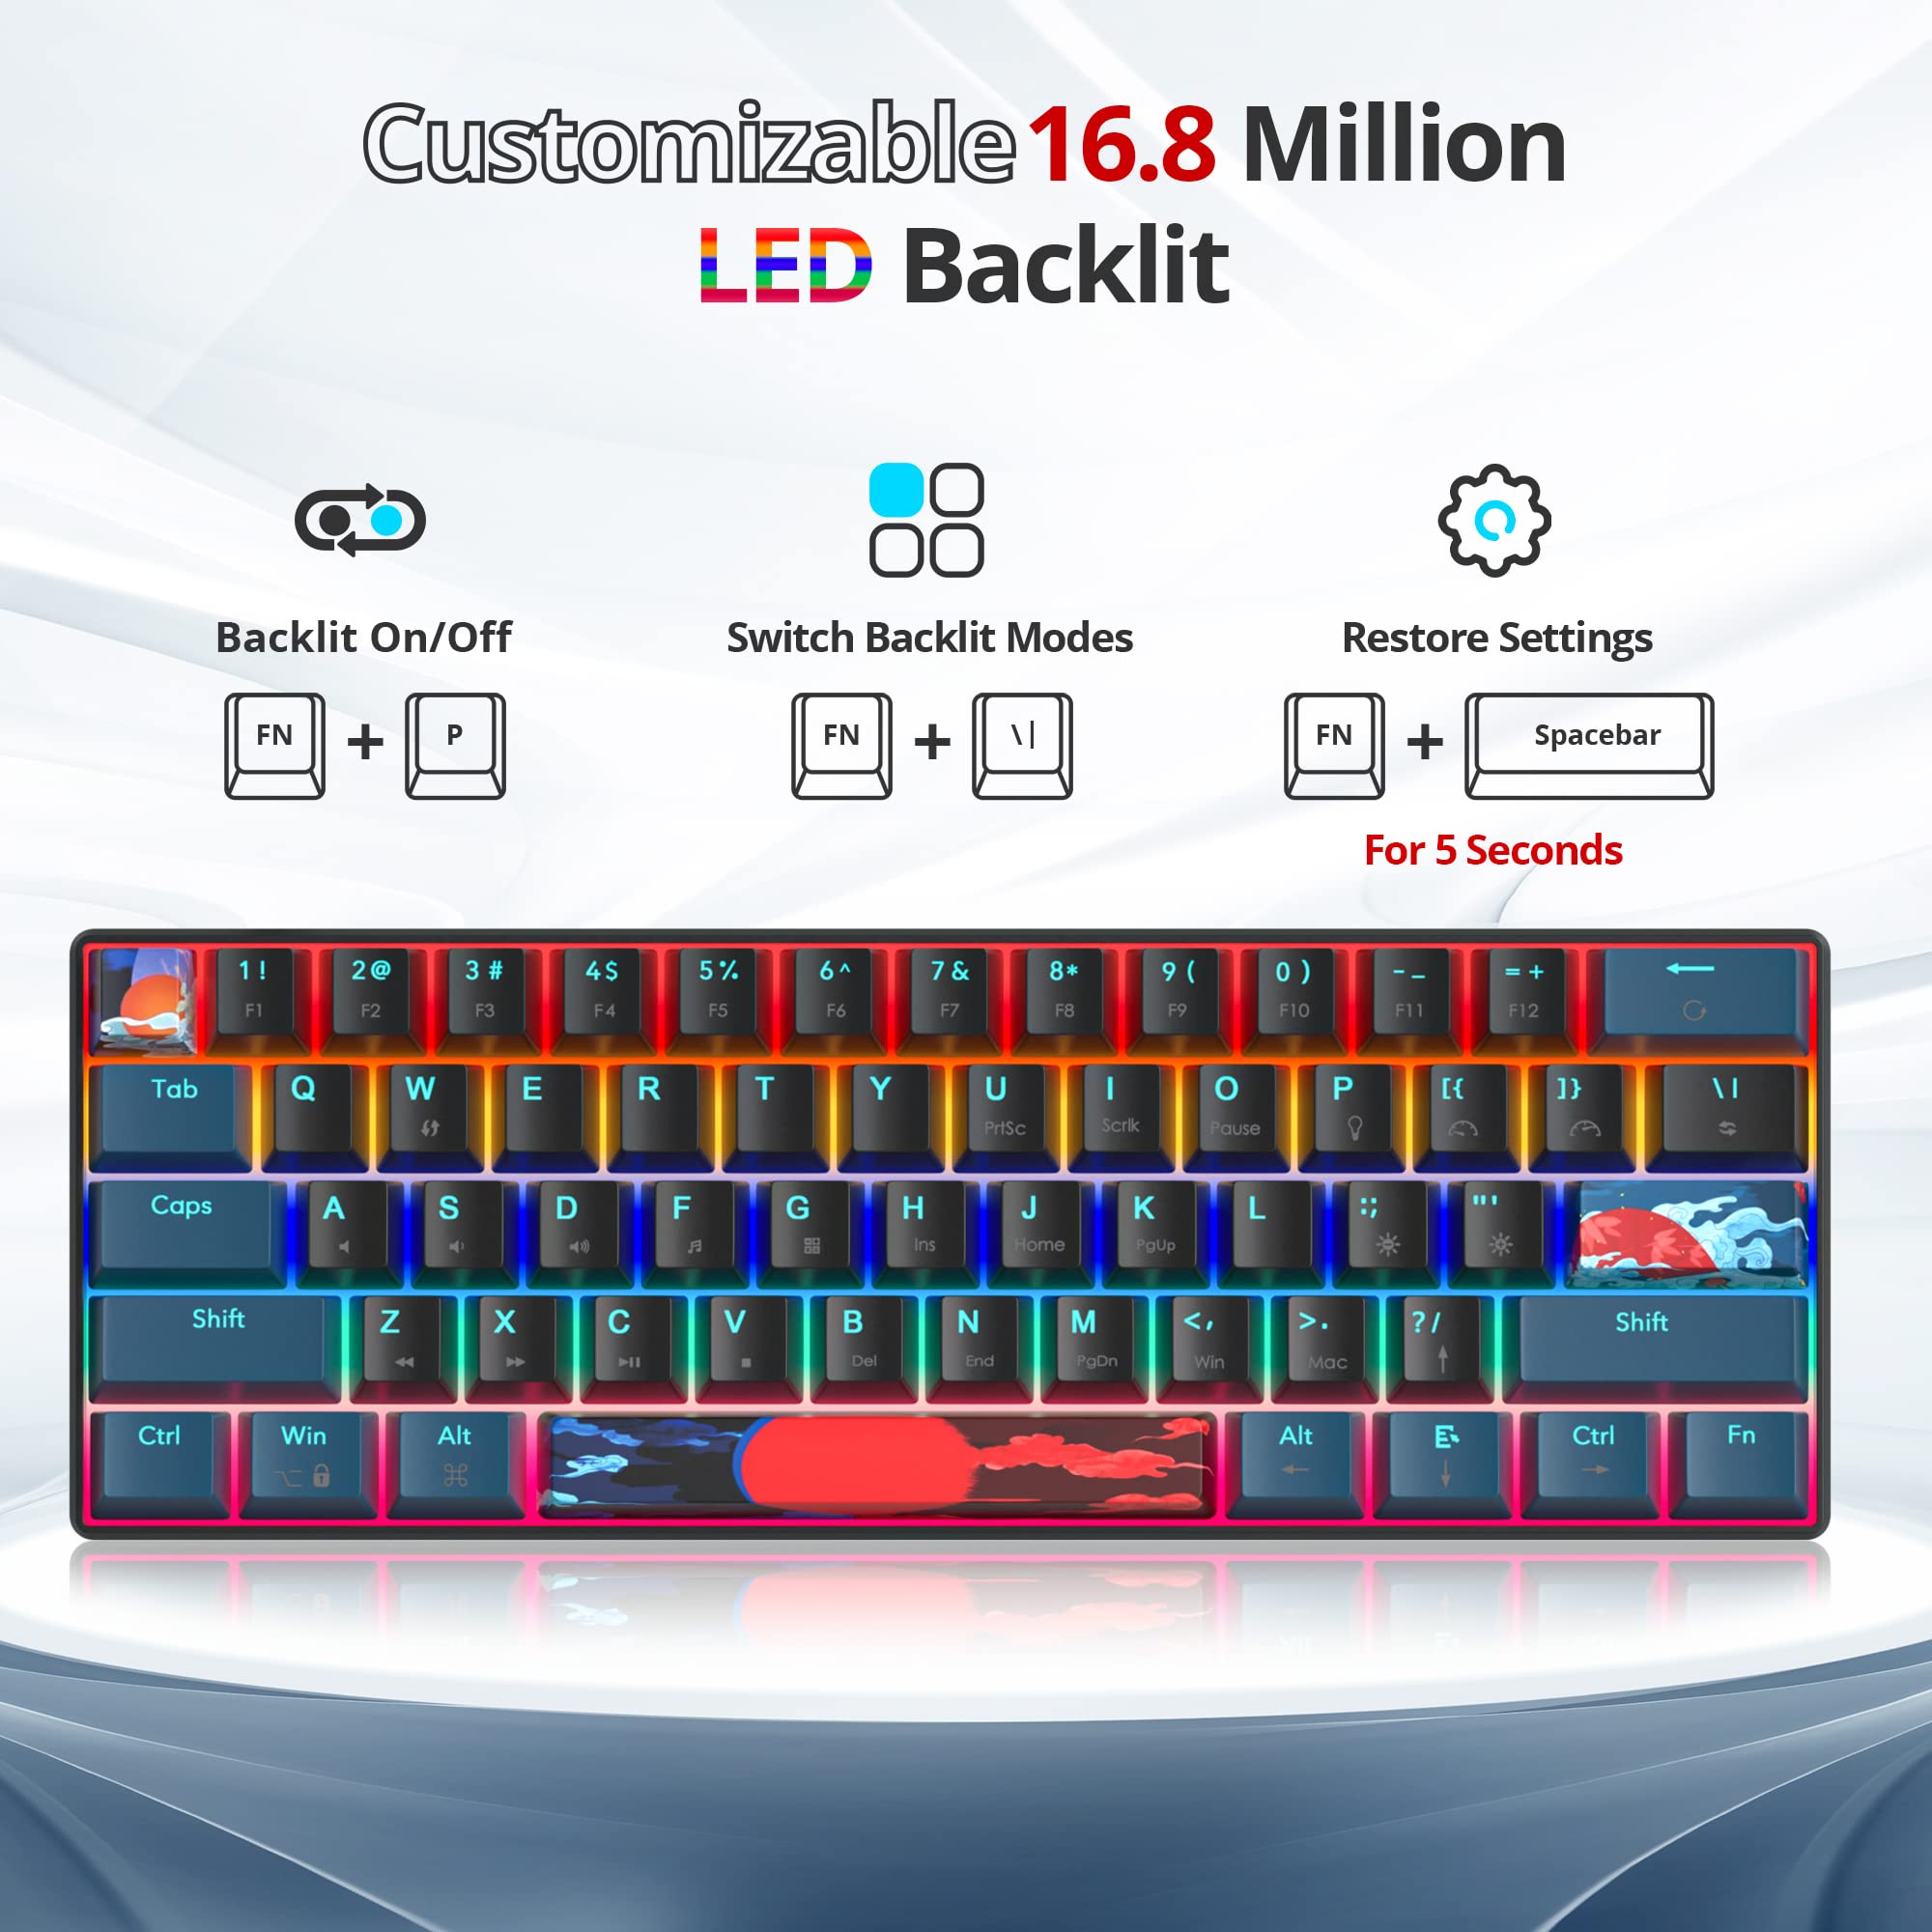 Protable 60% Percent Mixed Light Rainbow Gaming Keyboard Mechanical, Mini Compact 61 Keys Wired Office Keyboard with red Switch for Mac/Win/ps4/ps5/xbox (Monstor Black/red Switch 61)